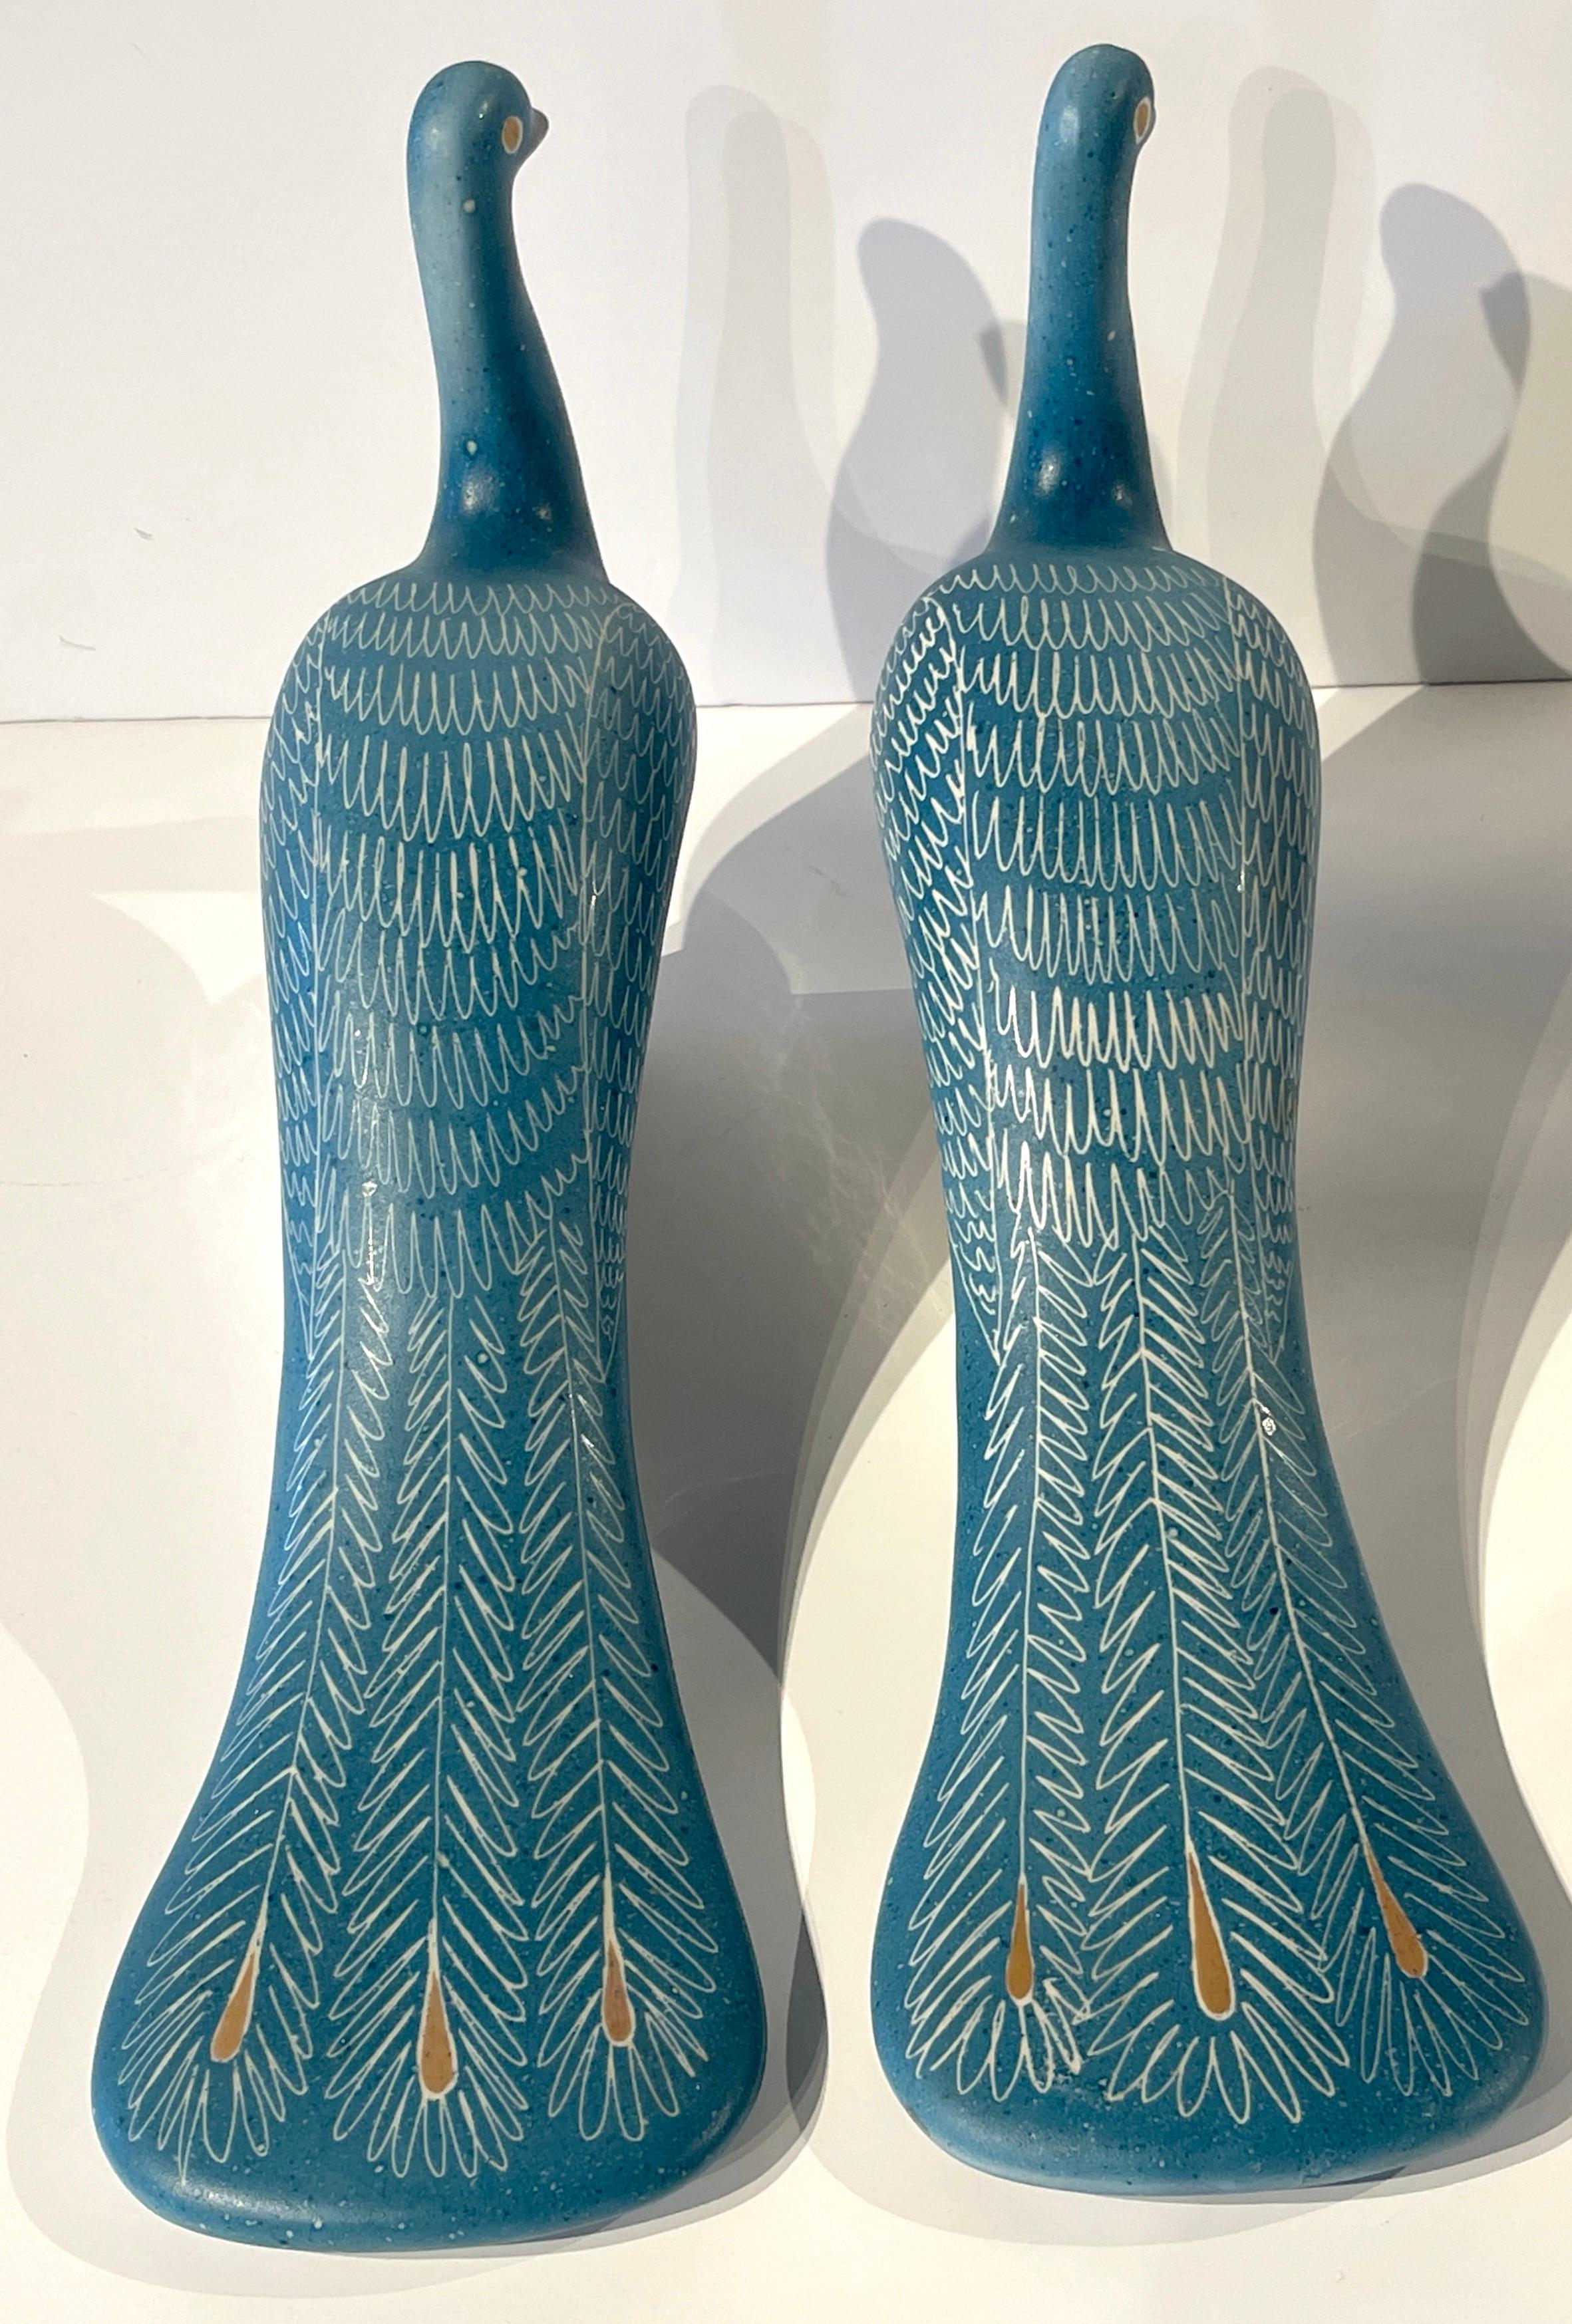 American Pair of Blue Peacocks Sculptures, by Waylande Gregory For Sale